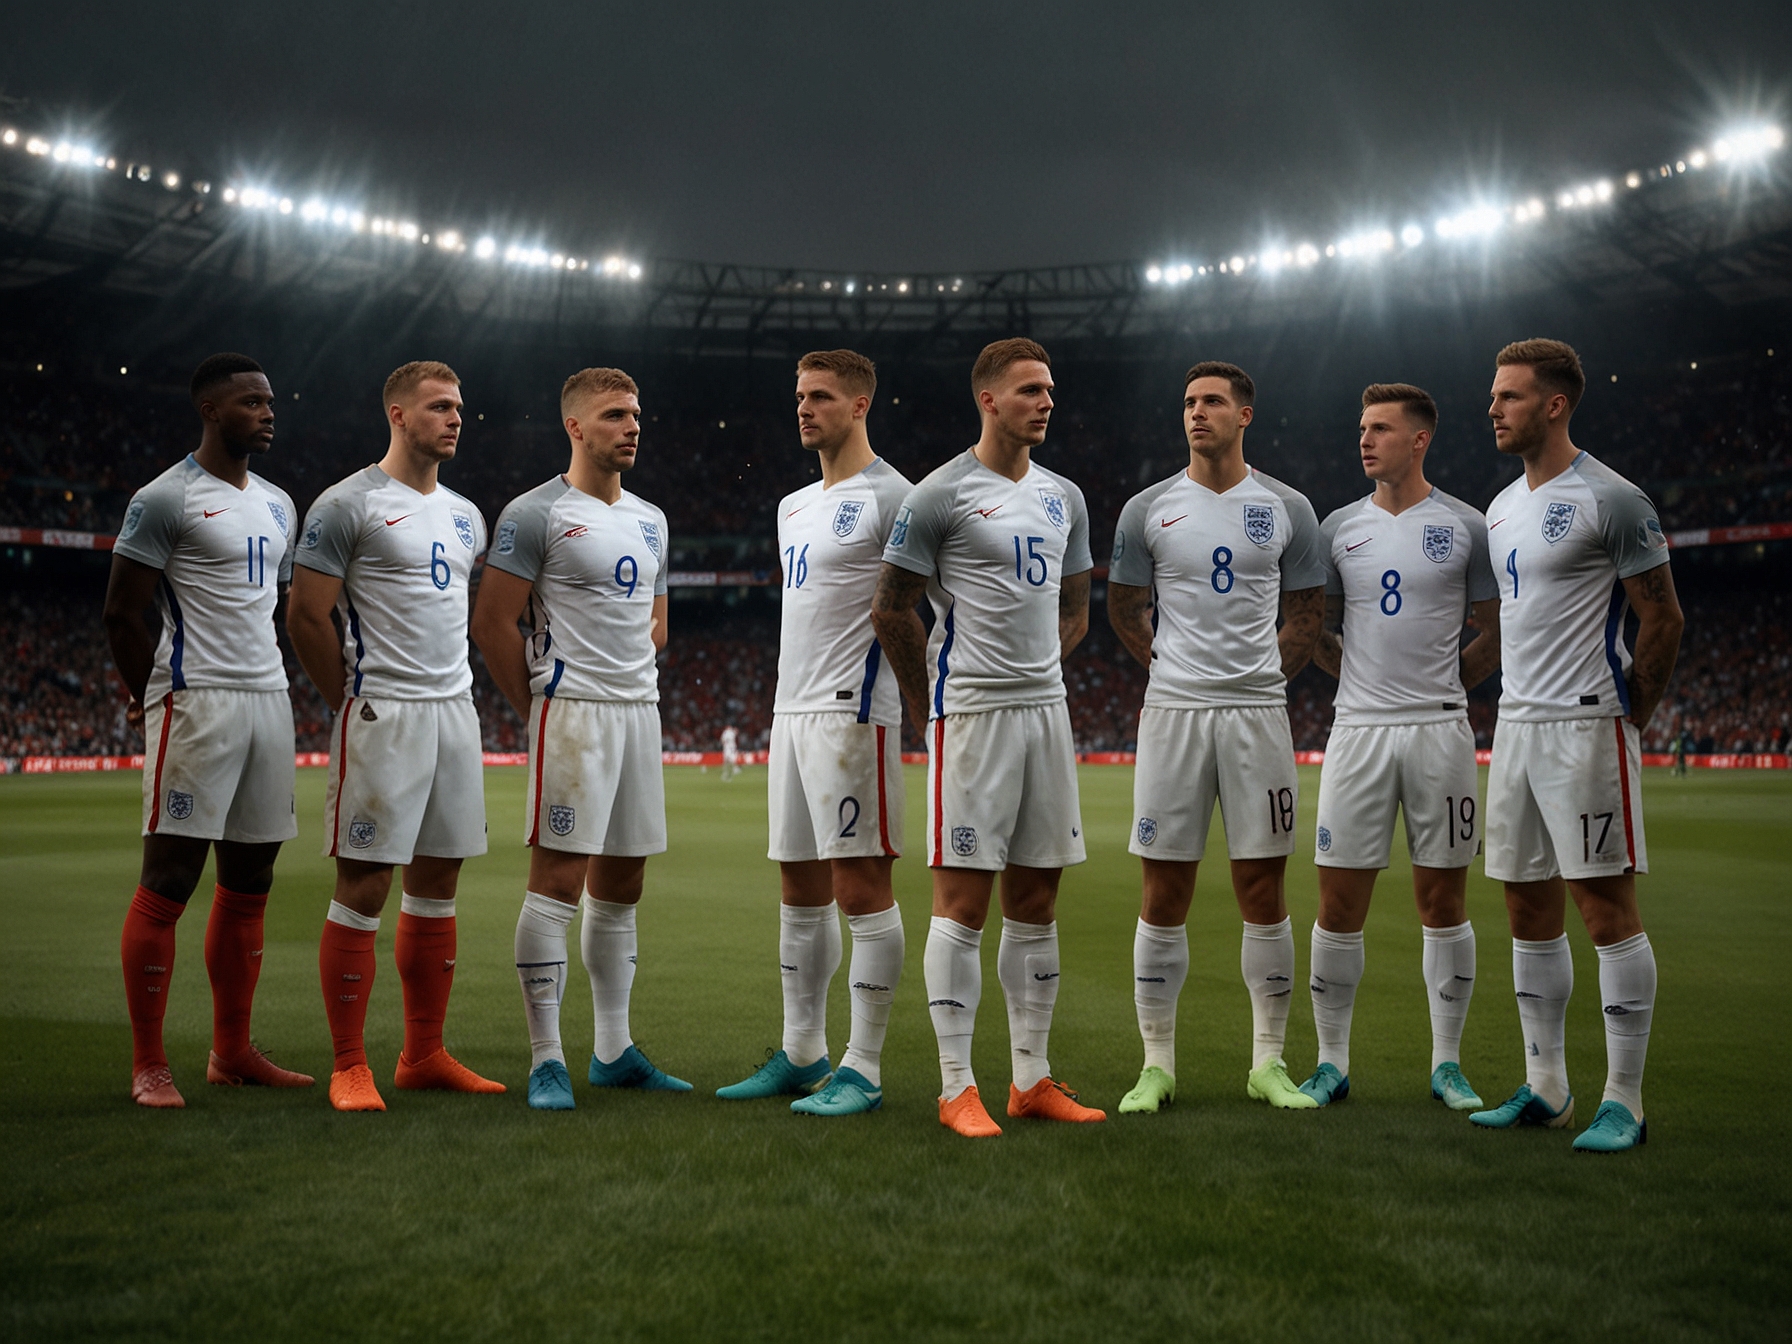 An image illustrating England's football team lined up on the pitch before the match against Denmark, looking determined but ultimately delivering a lackluster performance.